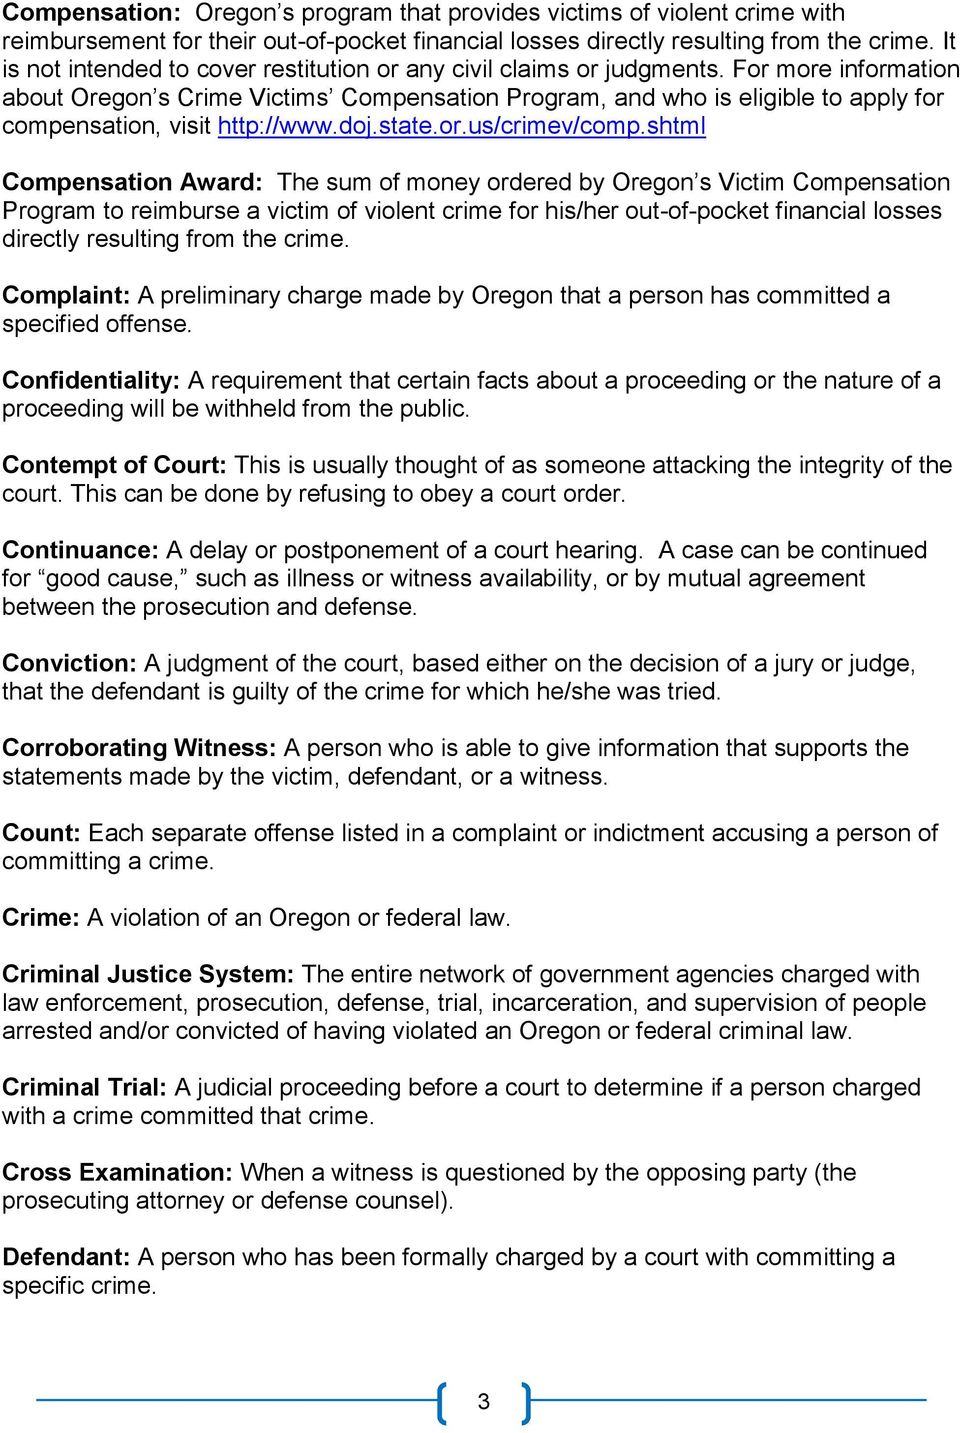 For more information about Oregon s Crime Victims Compensation Program, and who is eligible to apply for compensation, visit http://www.doj.state.or.us/crimev/comp.